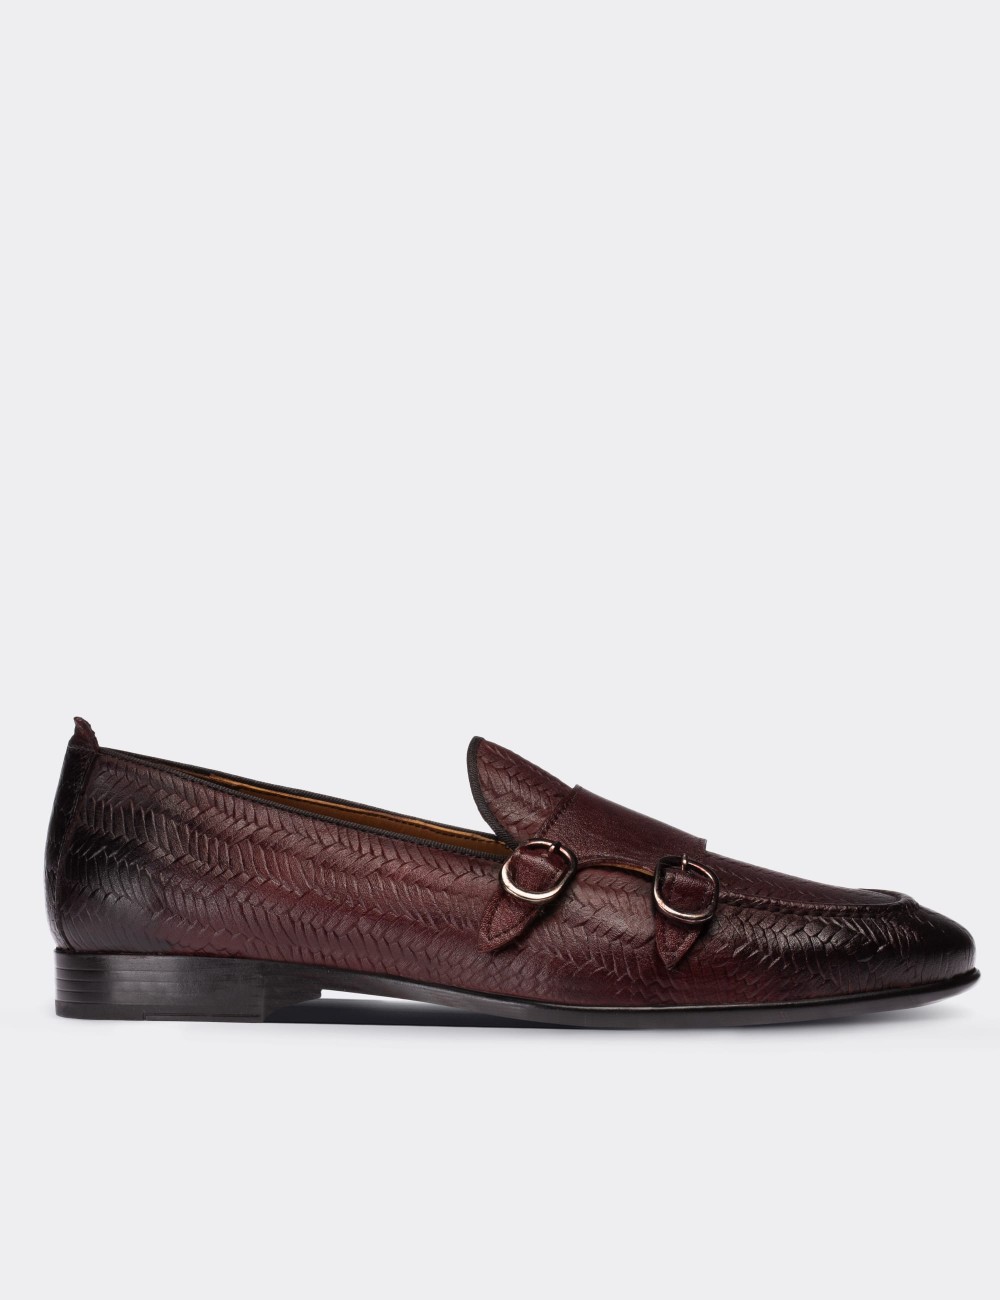 Burgundy Suede Leather Double Strap Loafers - 01704MBRDC05